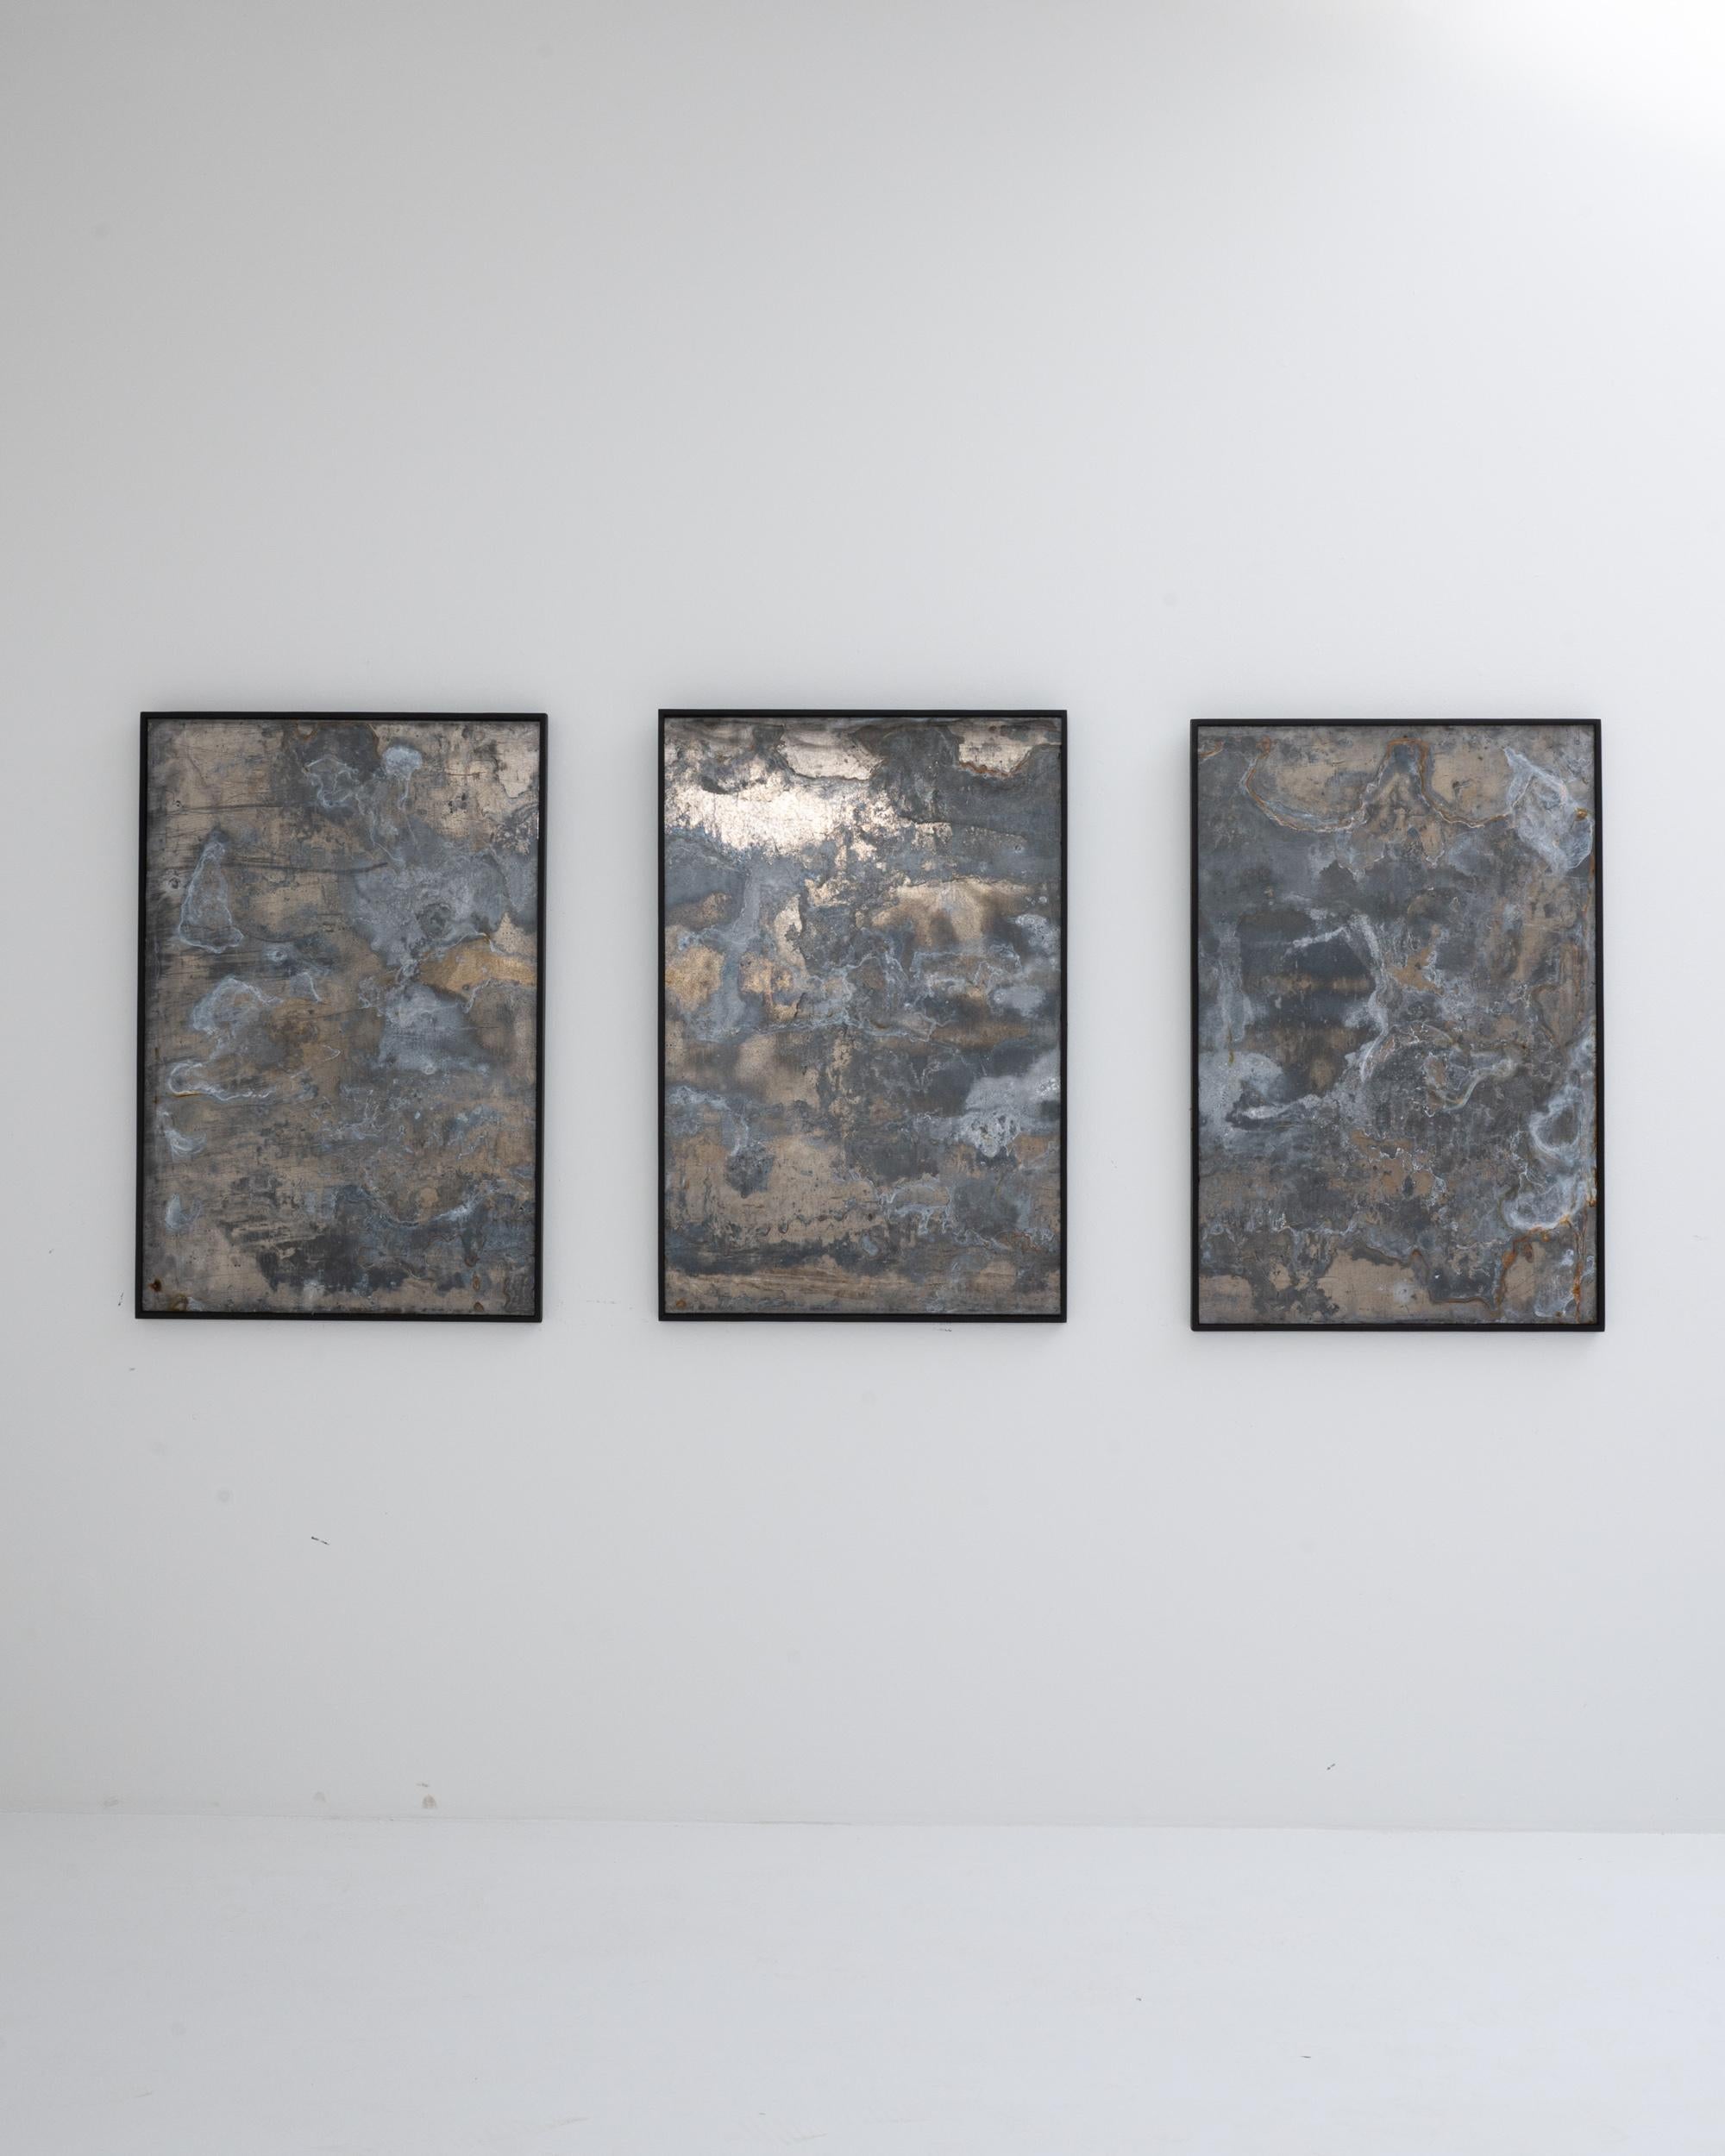 Bold and enigmatic, this large scale abstract triptych combines the hand of man and the hand of nature. The form has a Minimalist simplicity: three sheets of metal are set within black wooden frames. The surface of the metal combines human